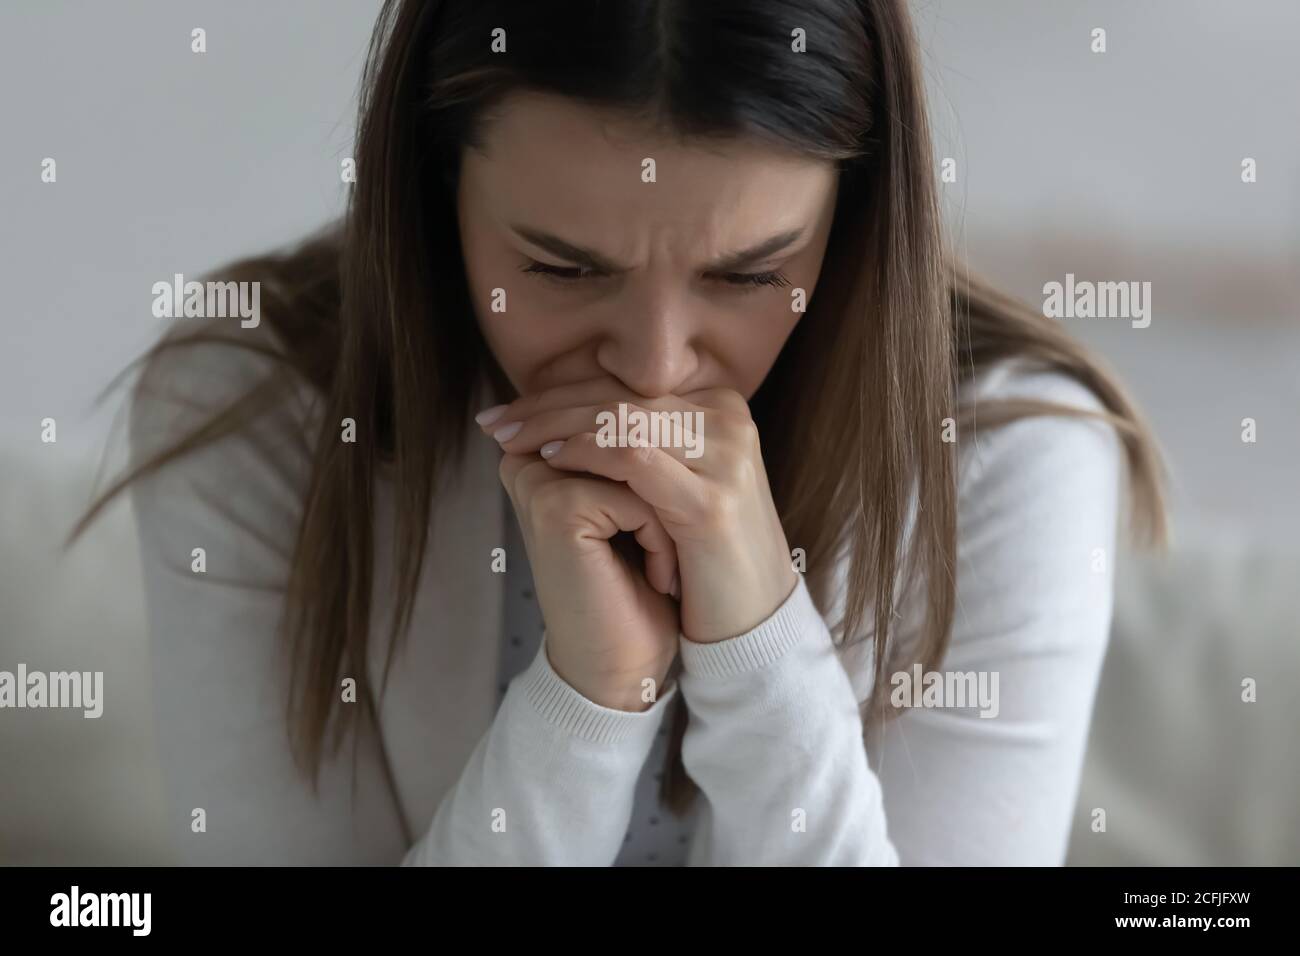 Stressed millennial woman worrying about hard decision. Stock Photo